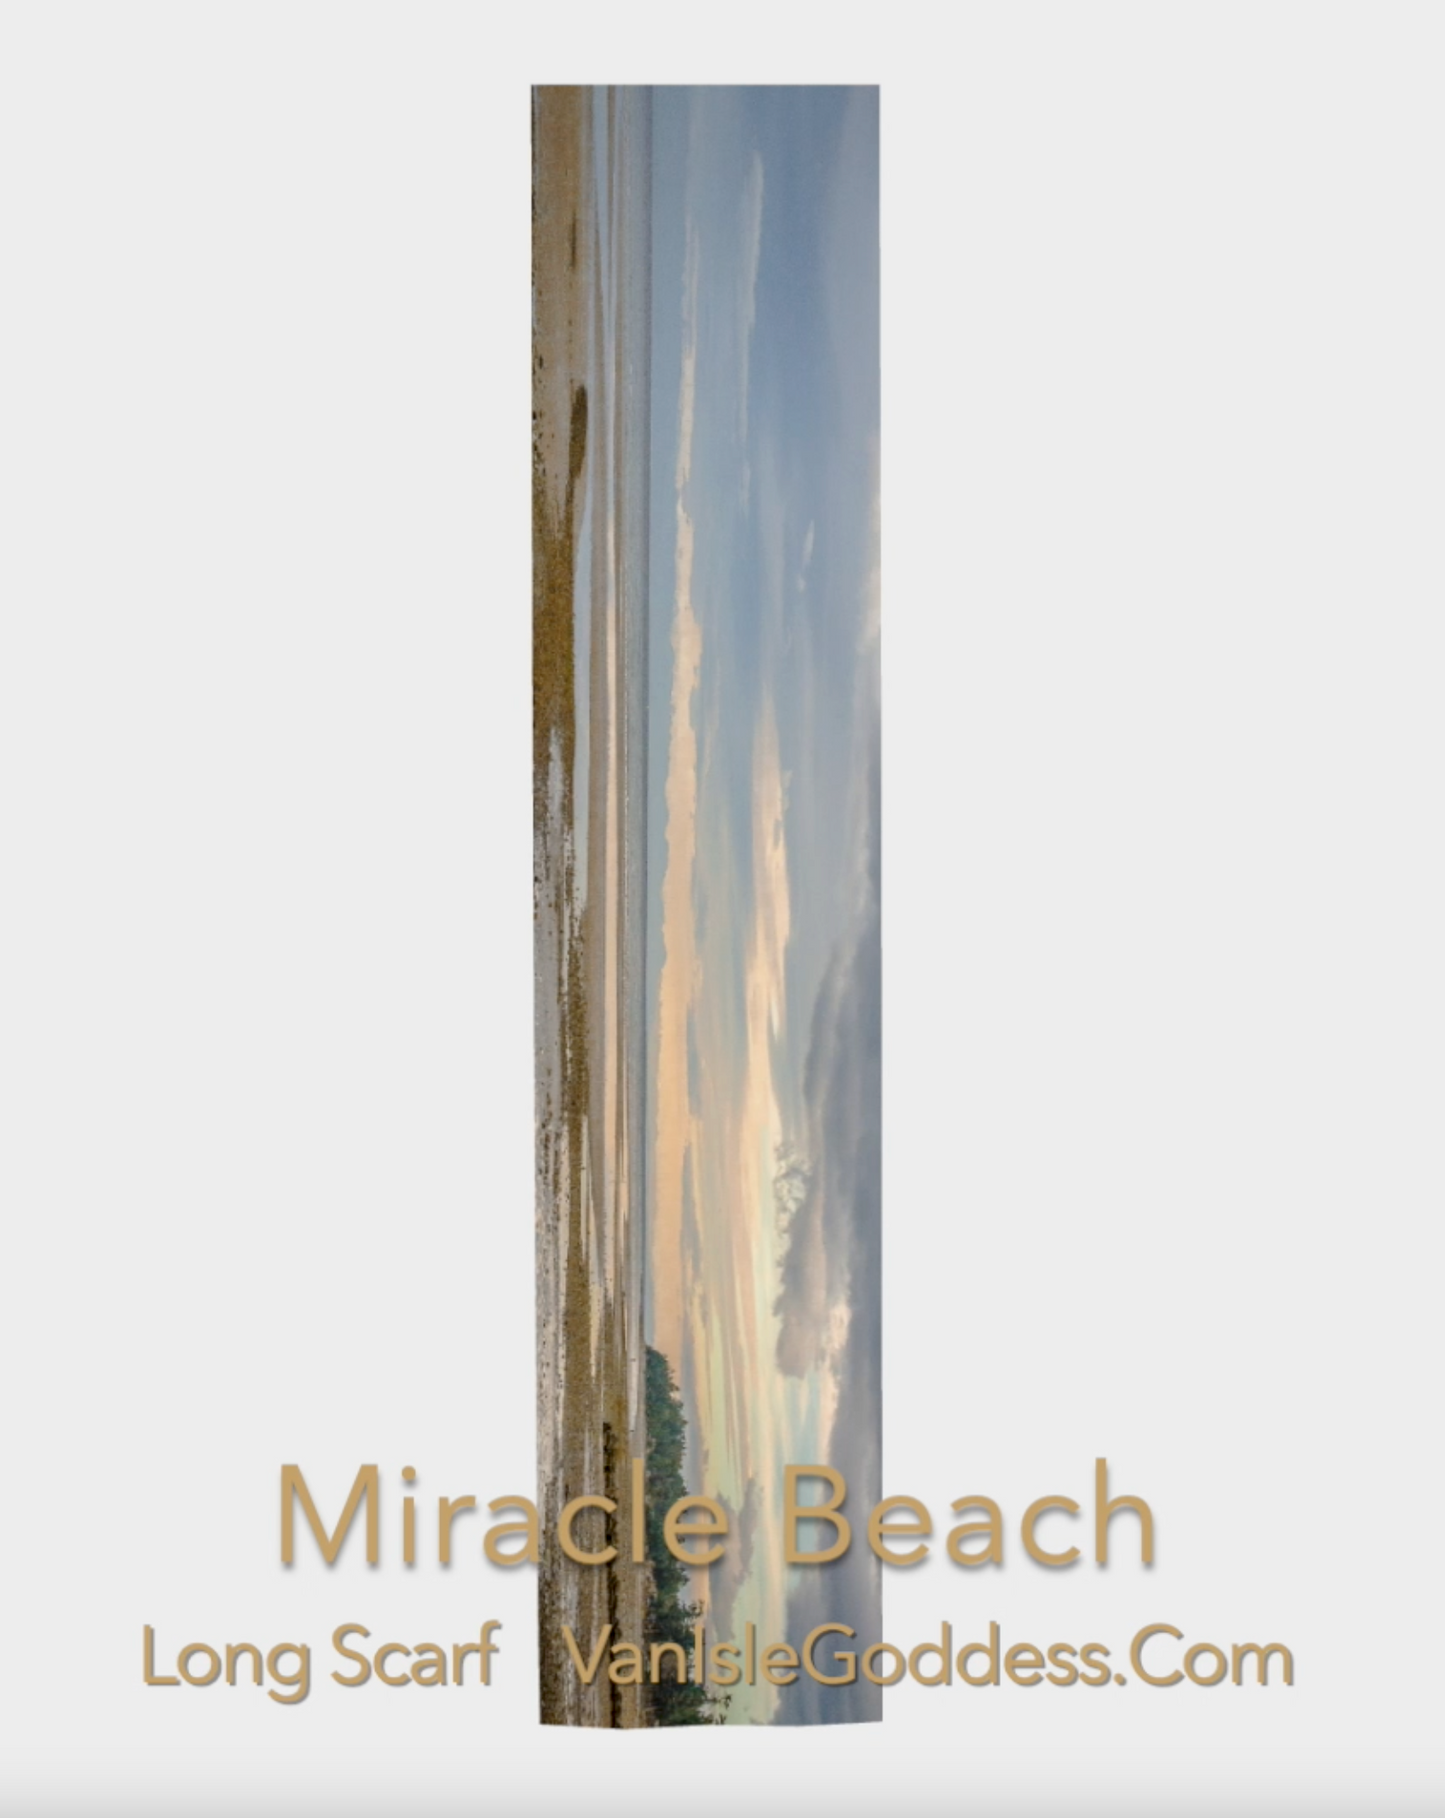 Miracle Beach long scarf shown with an image of Miracle beach.  The scarf is shown full length to show the entire image.